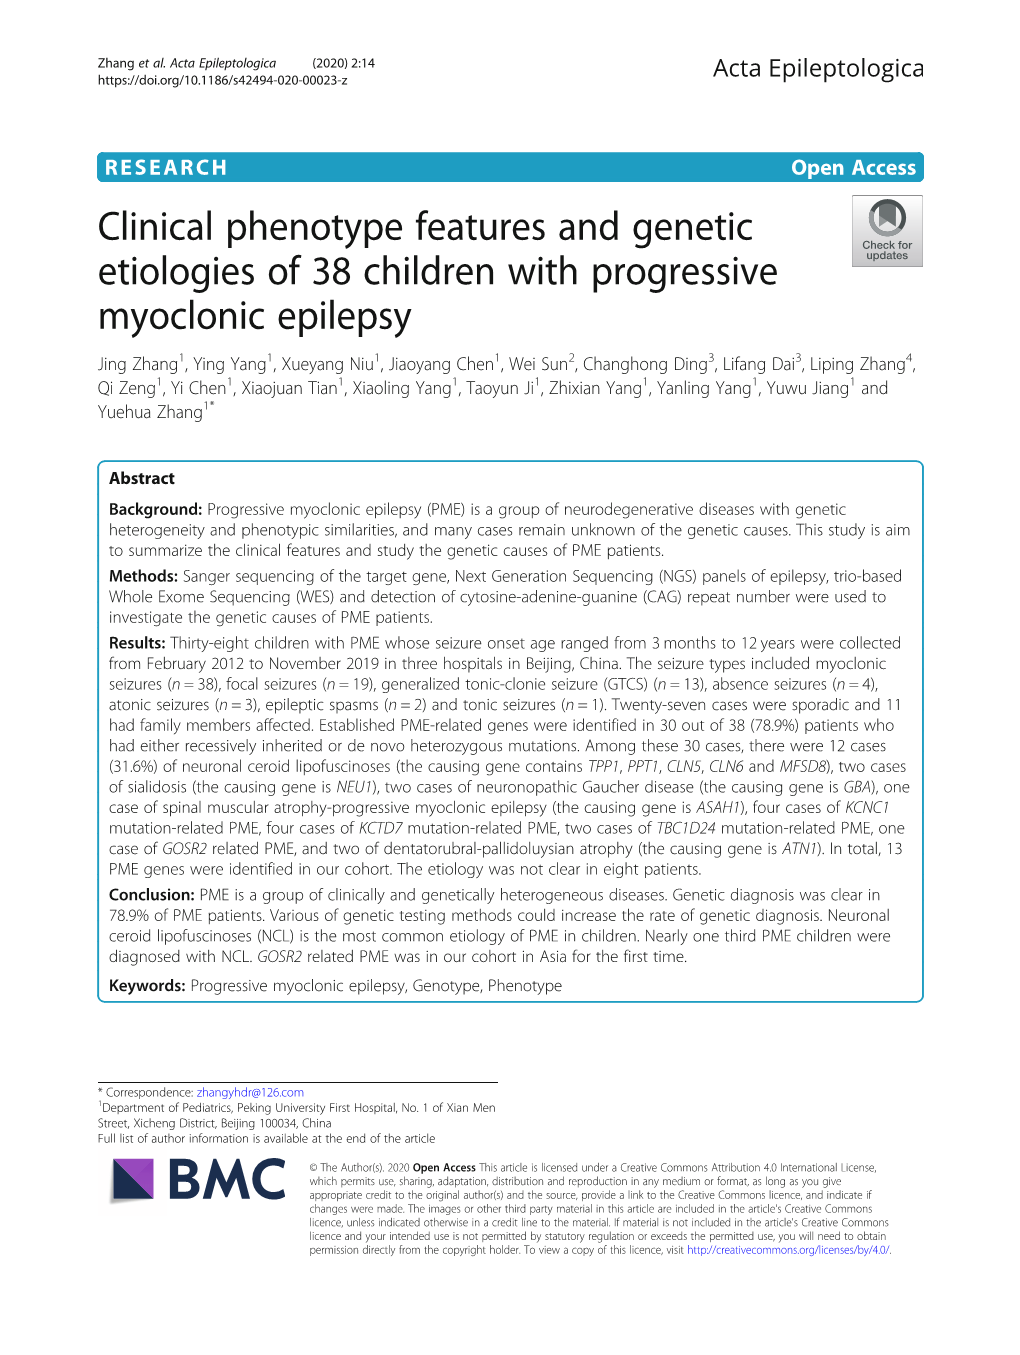 Clinical Phenotype Features and Genetic Etiologies of 38 Children